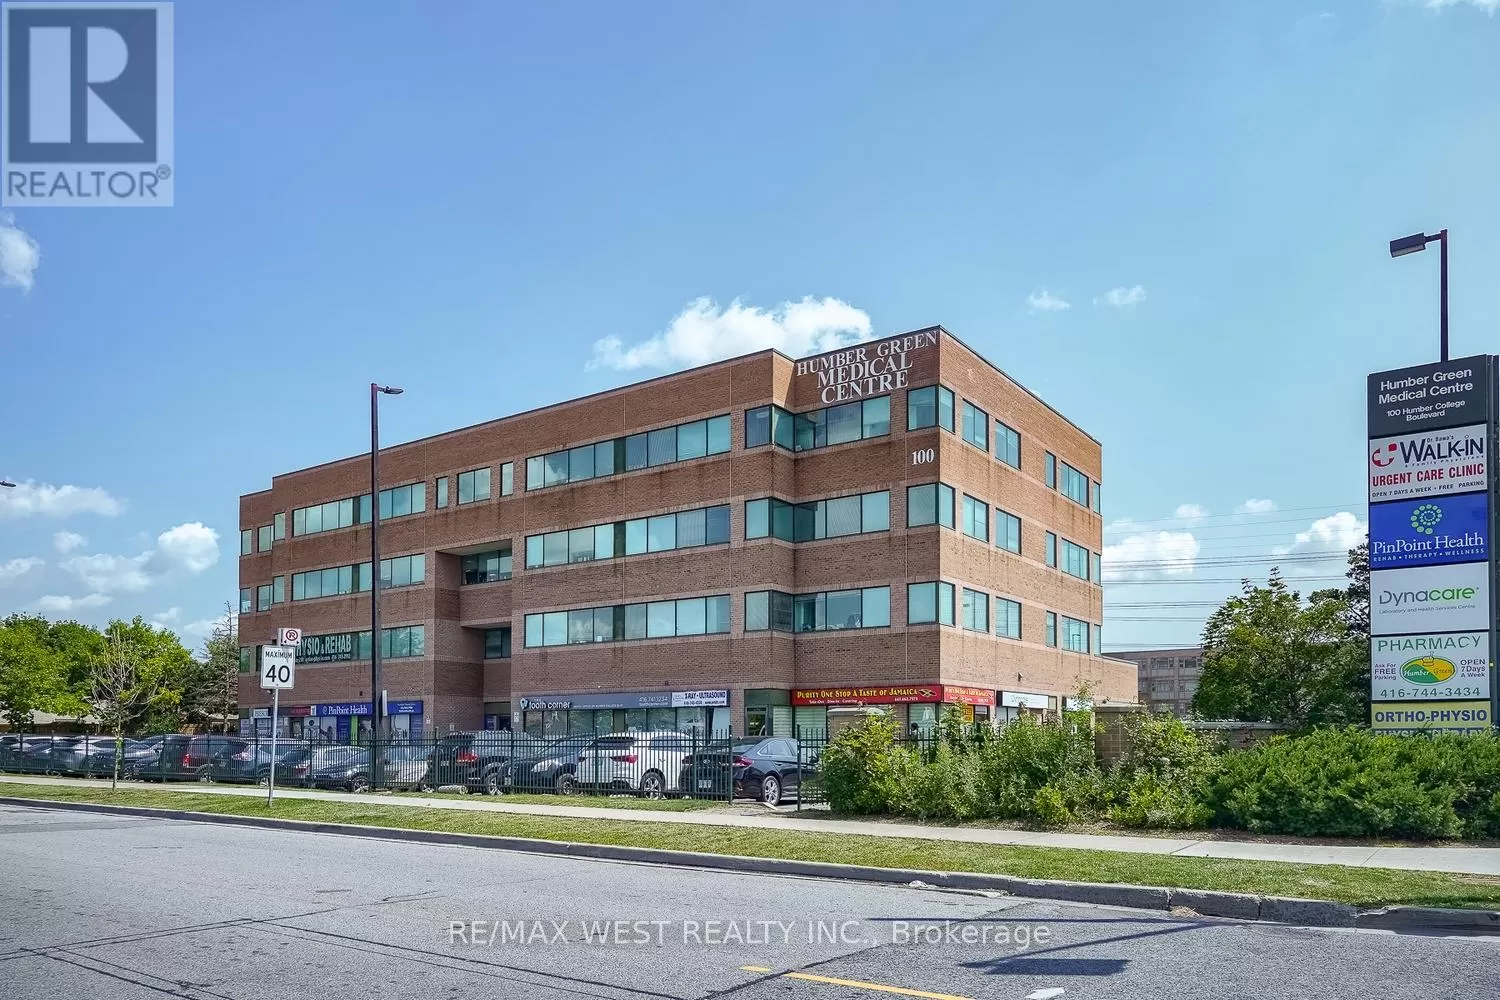 Offices for rent: #408 -100 Humber College Blvd, Toronto, Ontario M9V 5G4